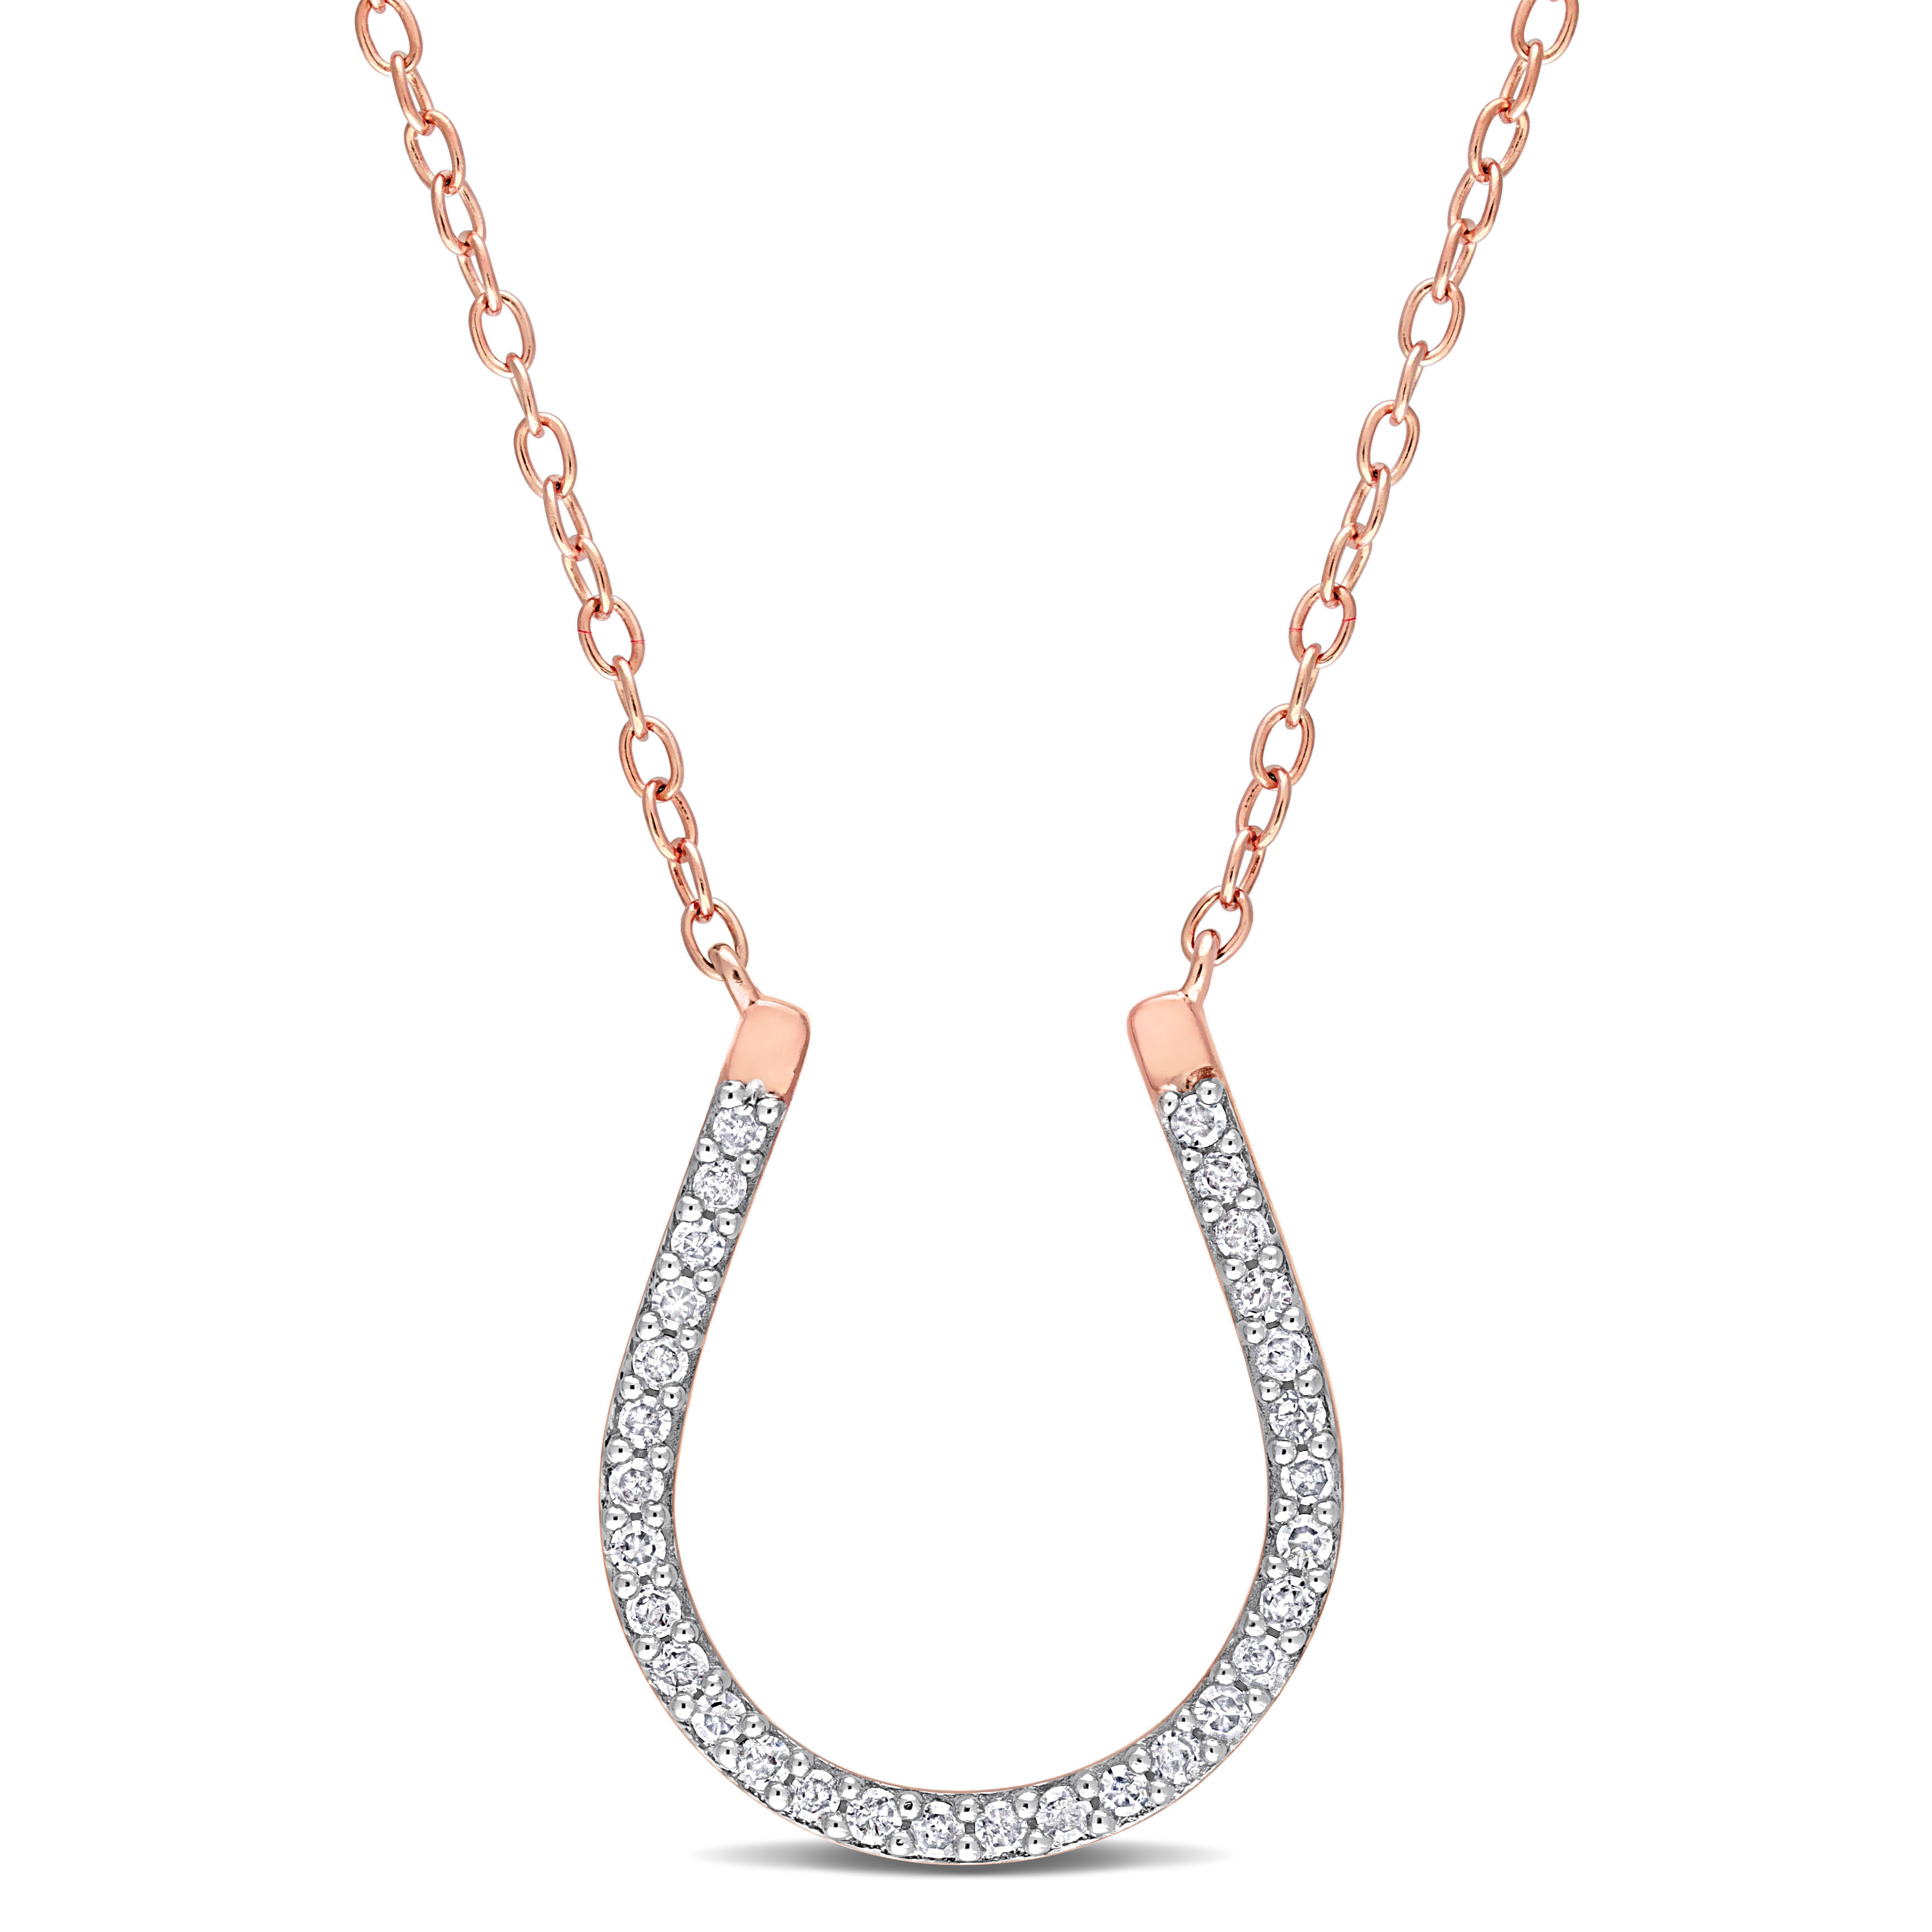 1/6 CT TW Diamond Horseshoe Pendant with Chain in Rose Plated Sterling Silver